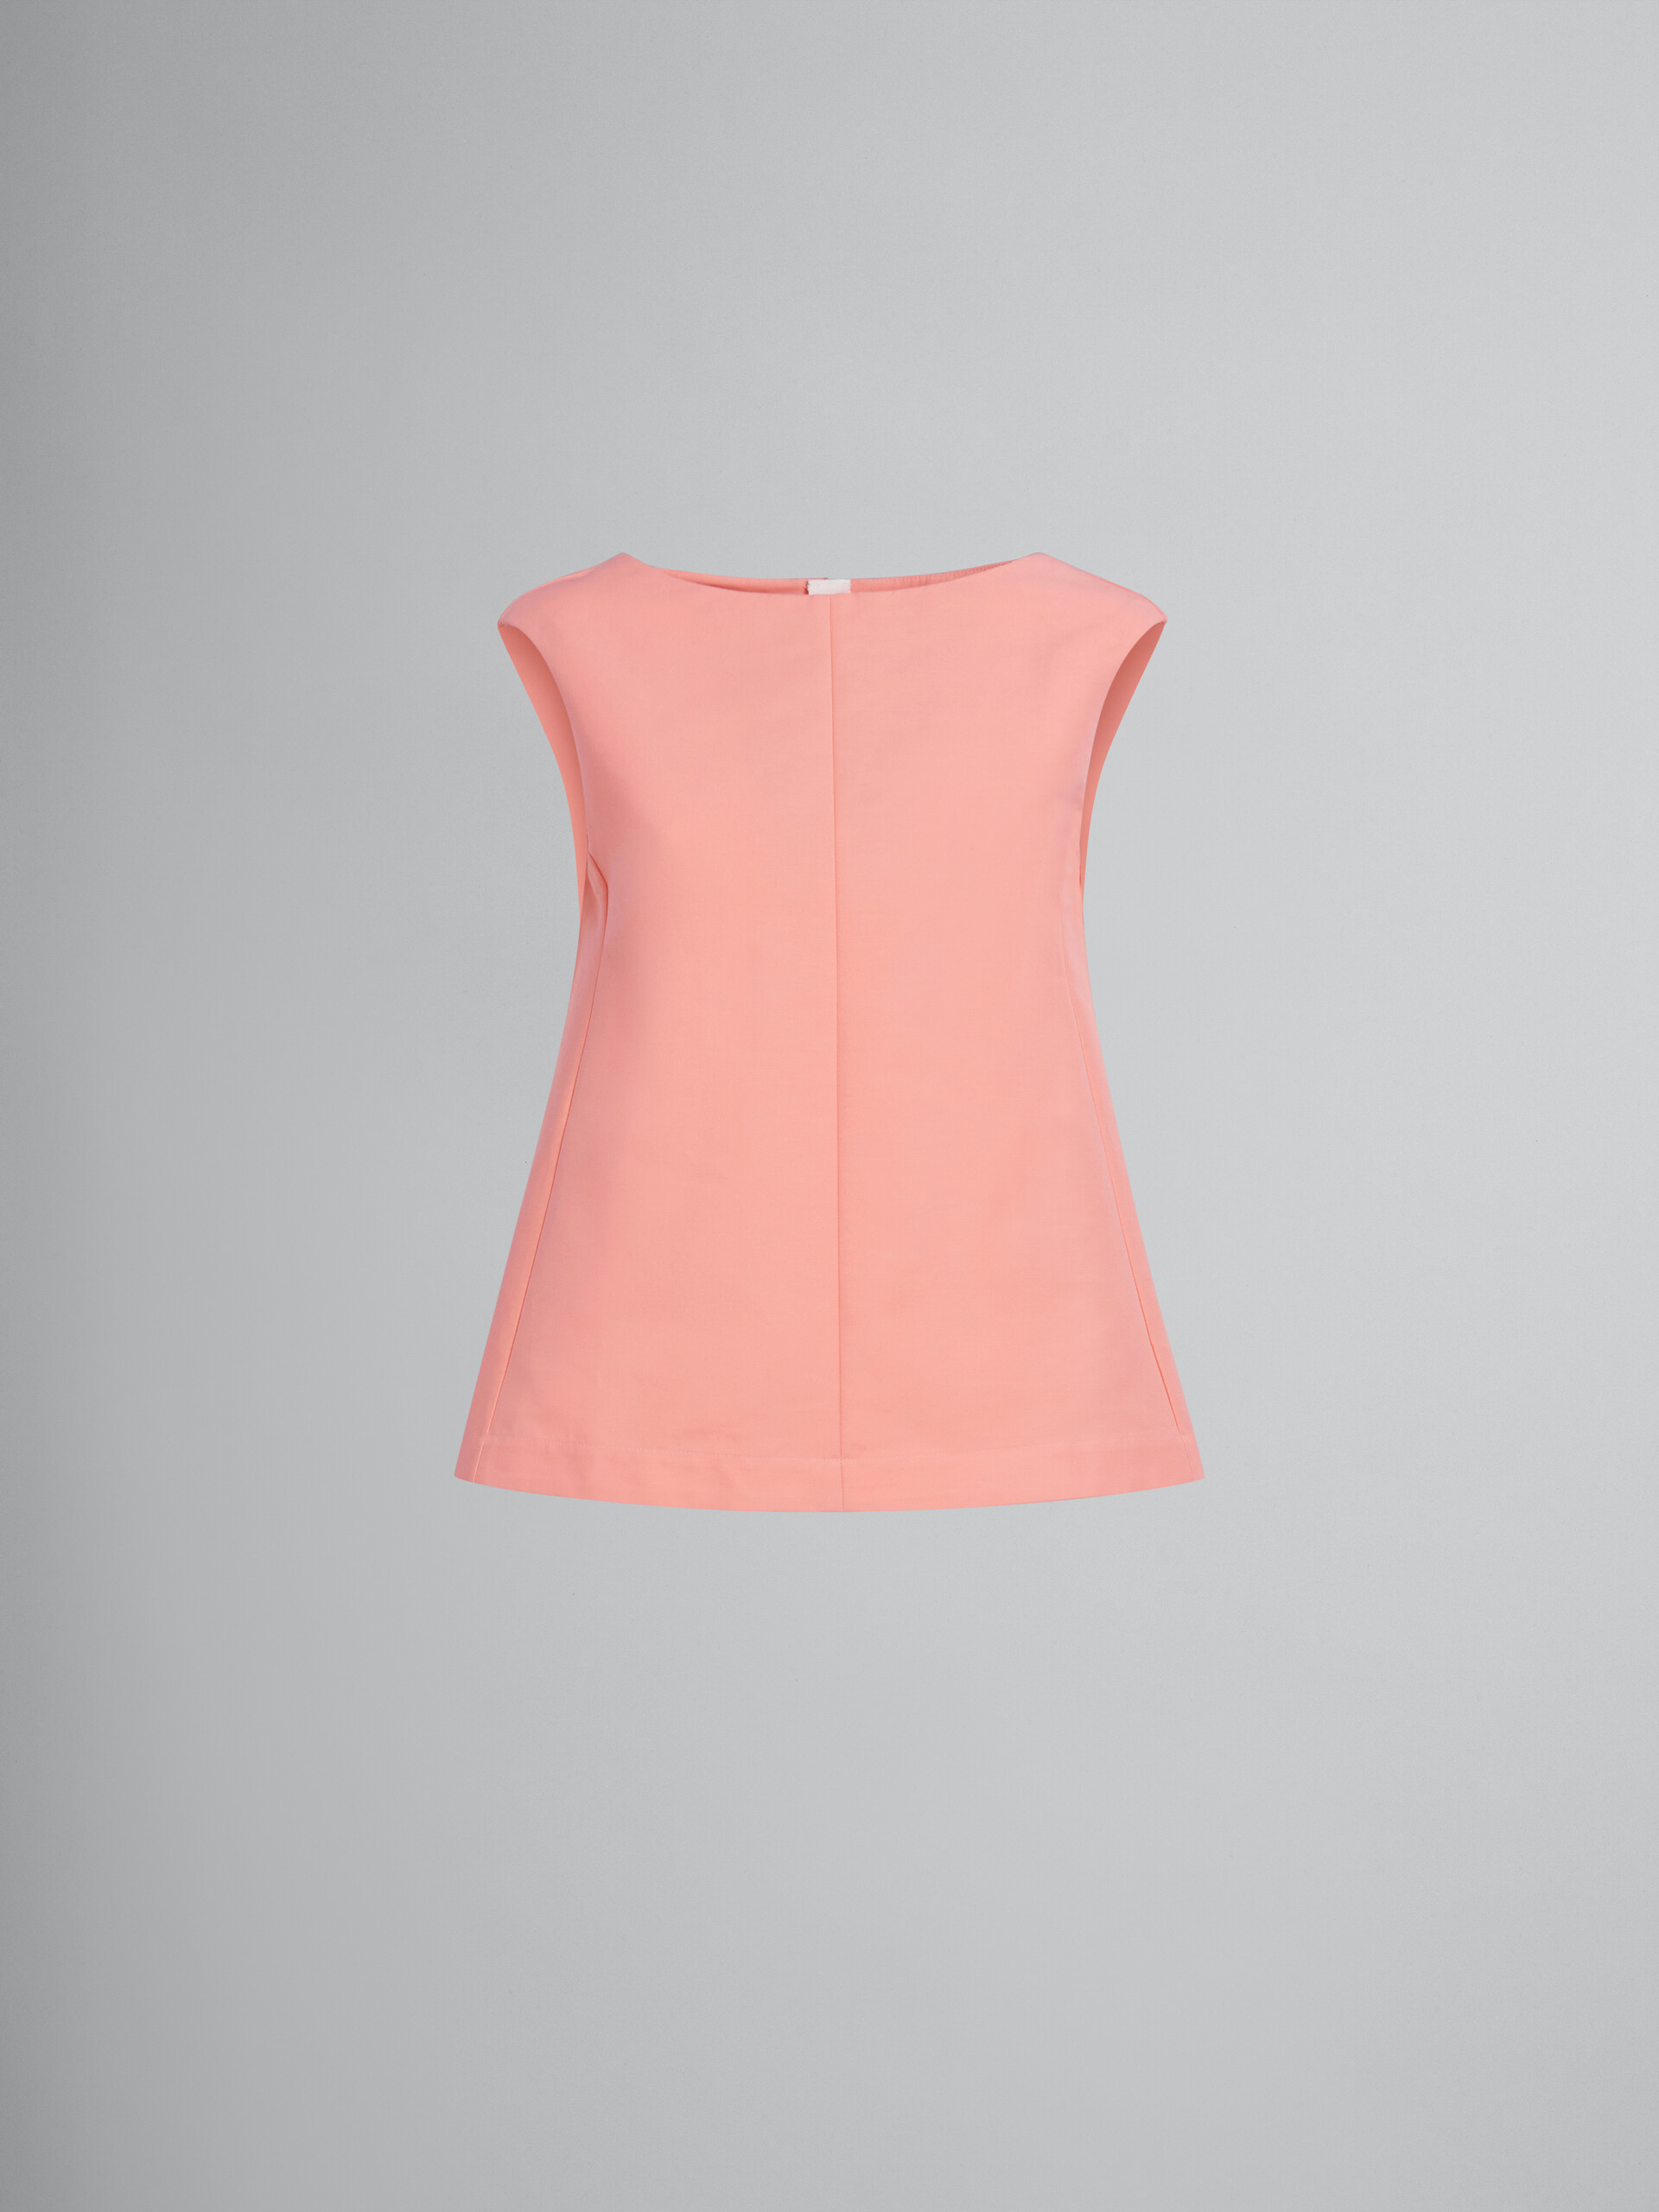 Peach cady cocoon top - Shirts - Image 1